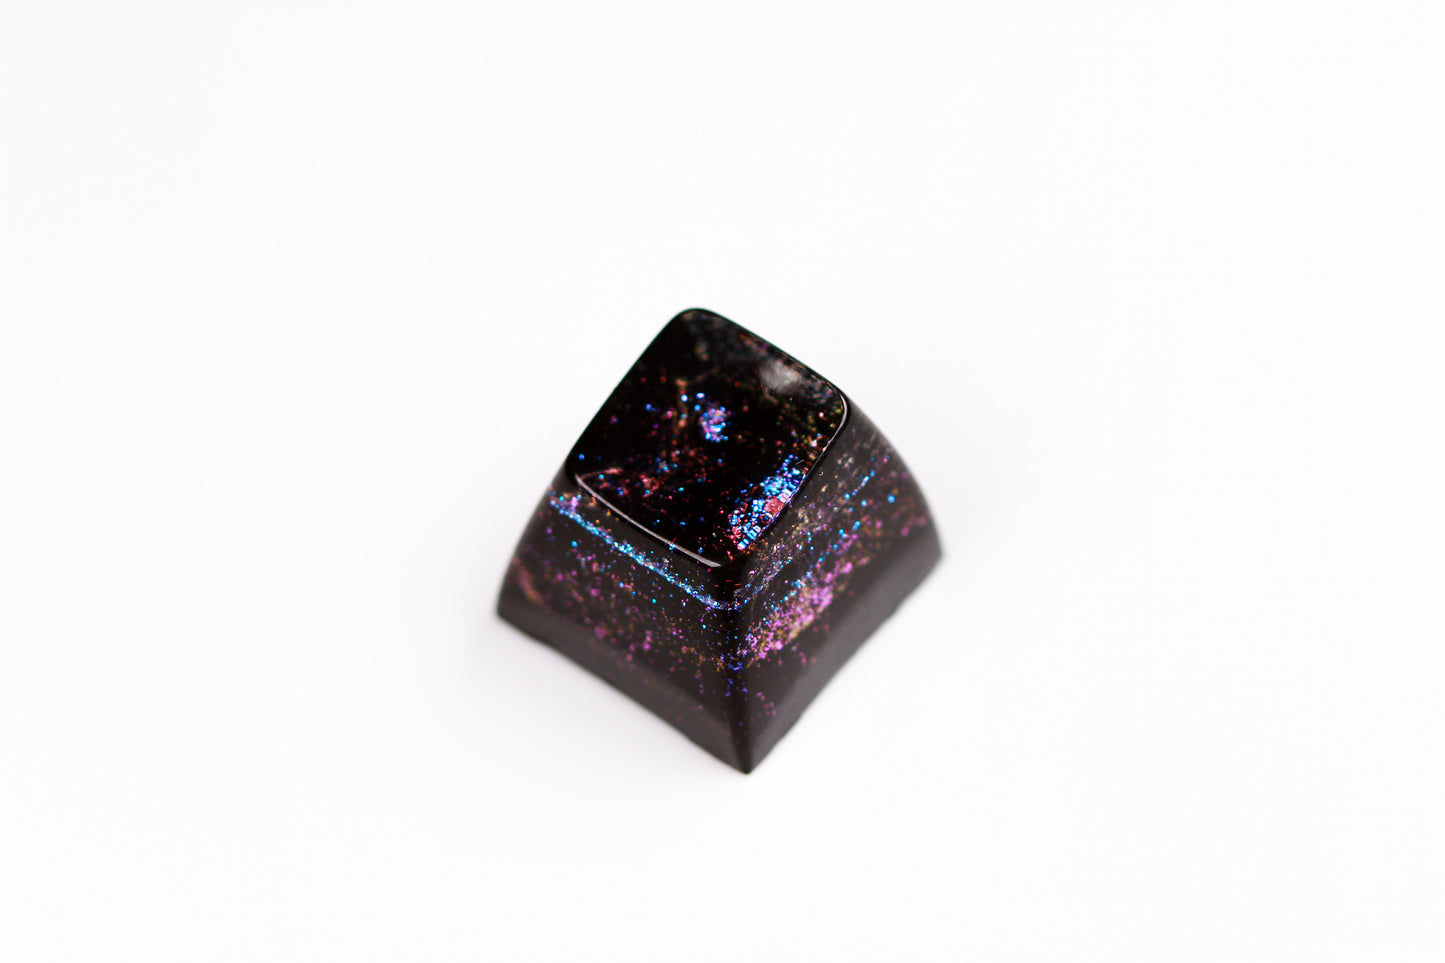 Gimpy SA Row 1 - Deep Field Particle Stream 4 - PrimeCaps Keycap - Blank and Sculpted Artisan Keycaps for cherry MX mechanical keyboards 